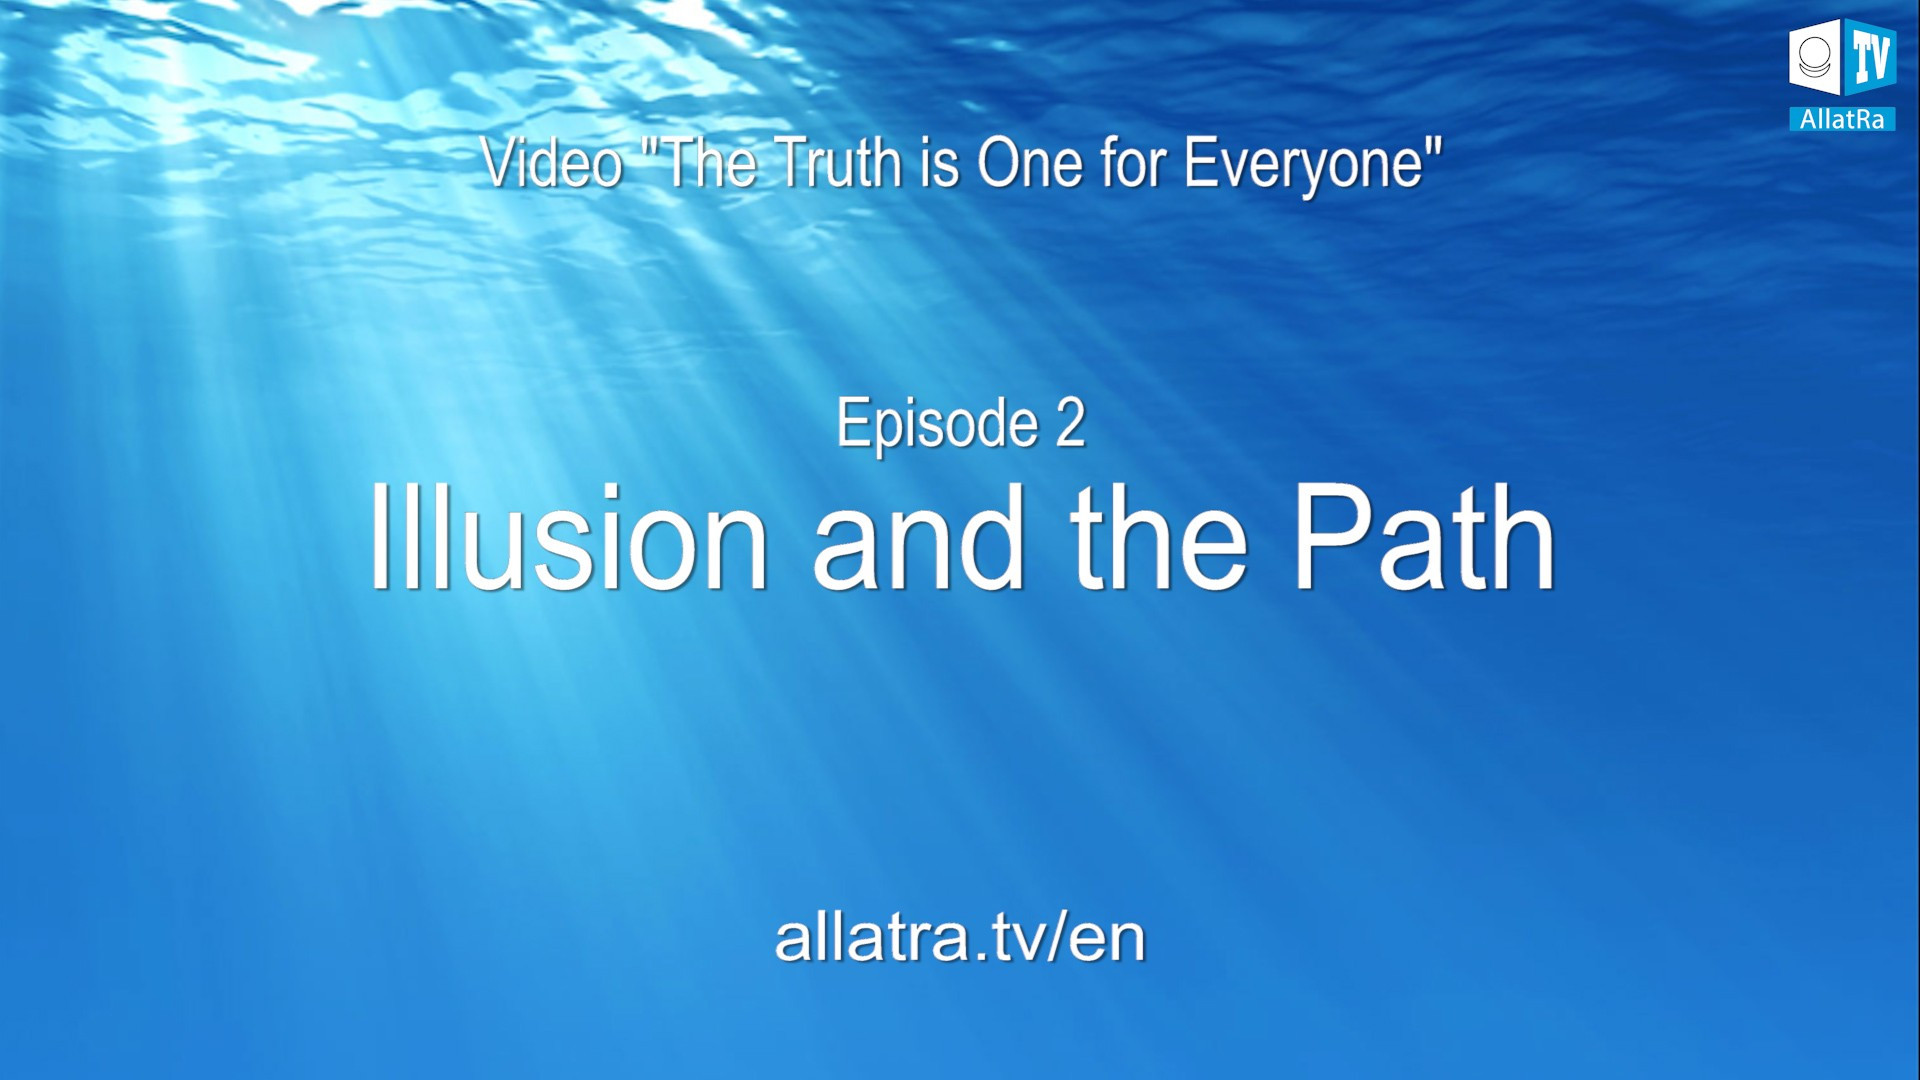 Illusion and the Path. The Truth is One for Everyone. Episode 2